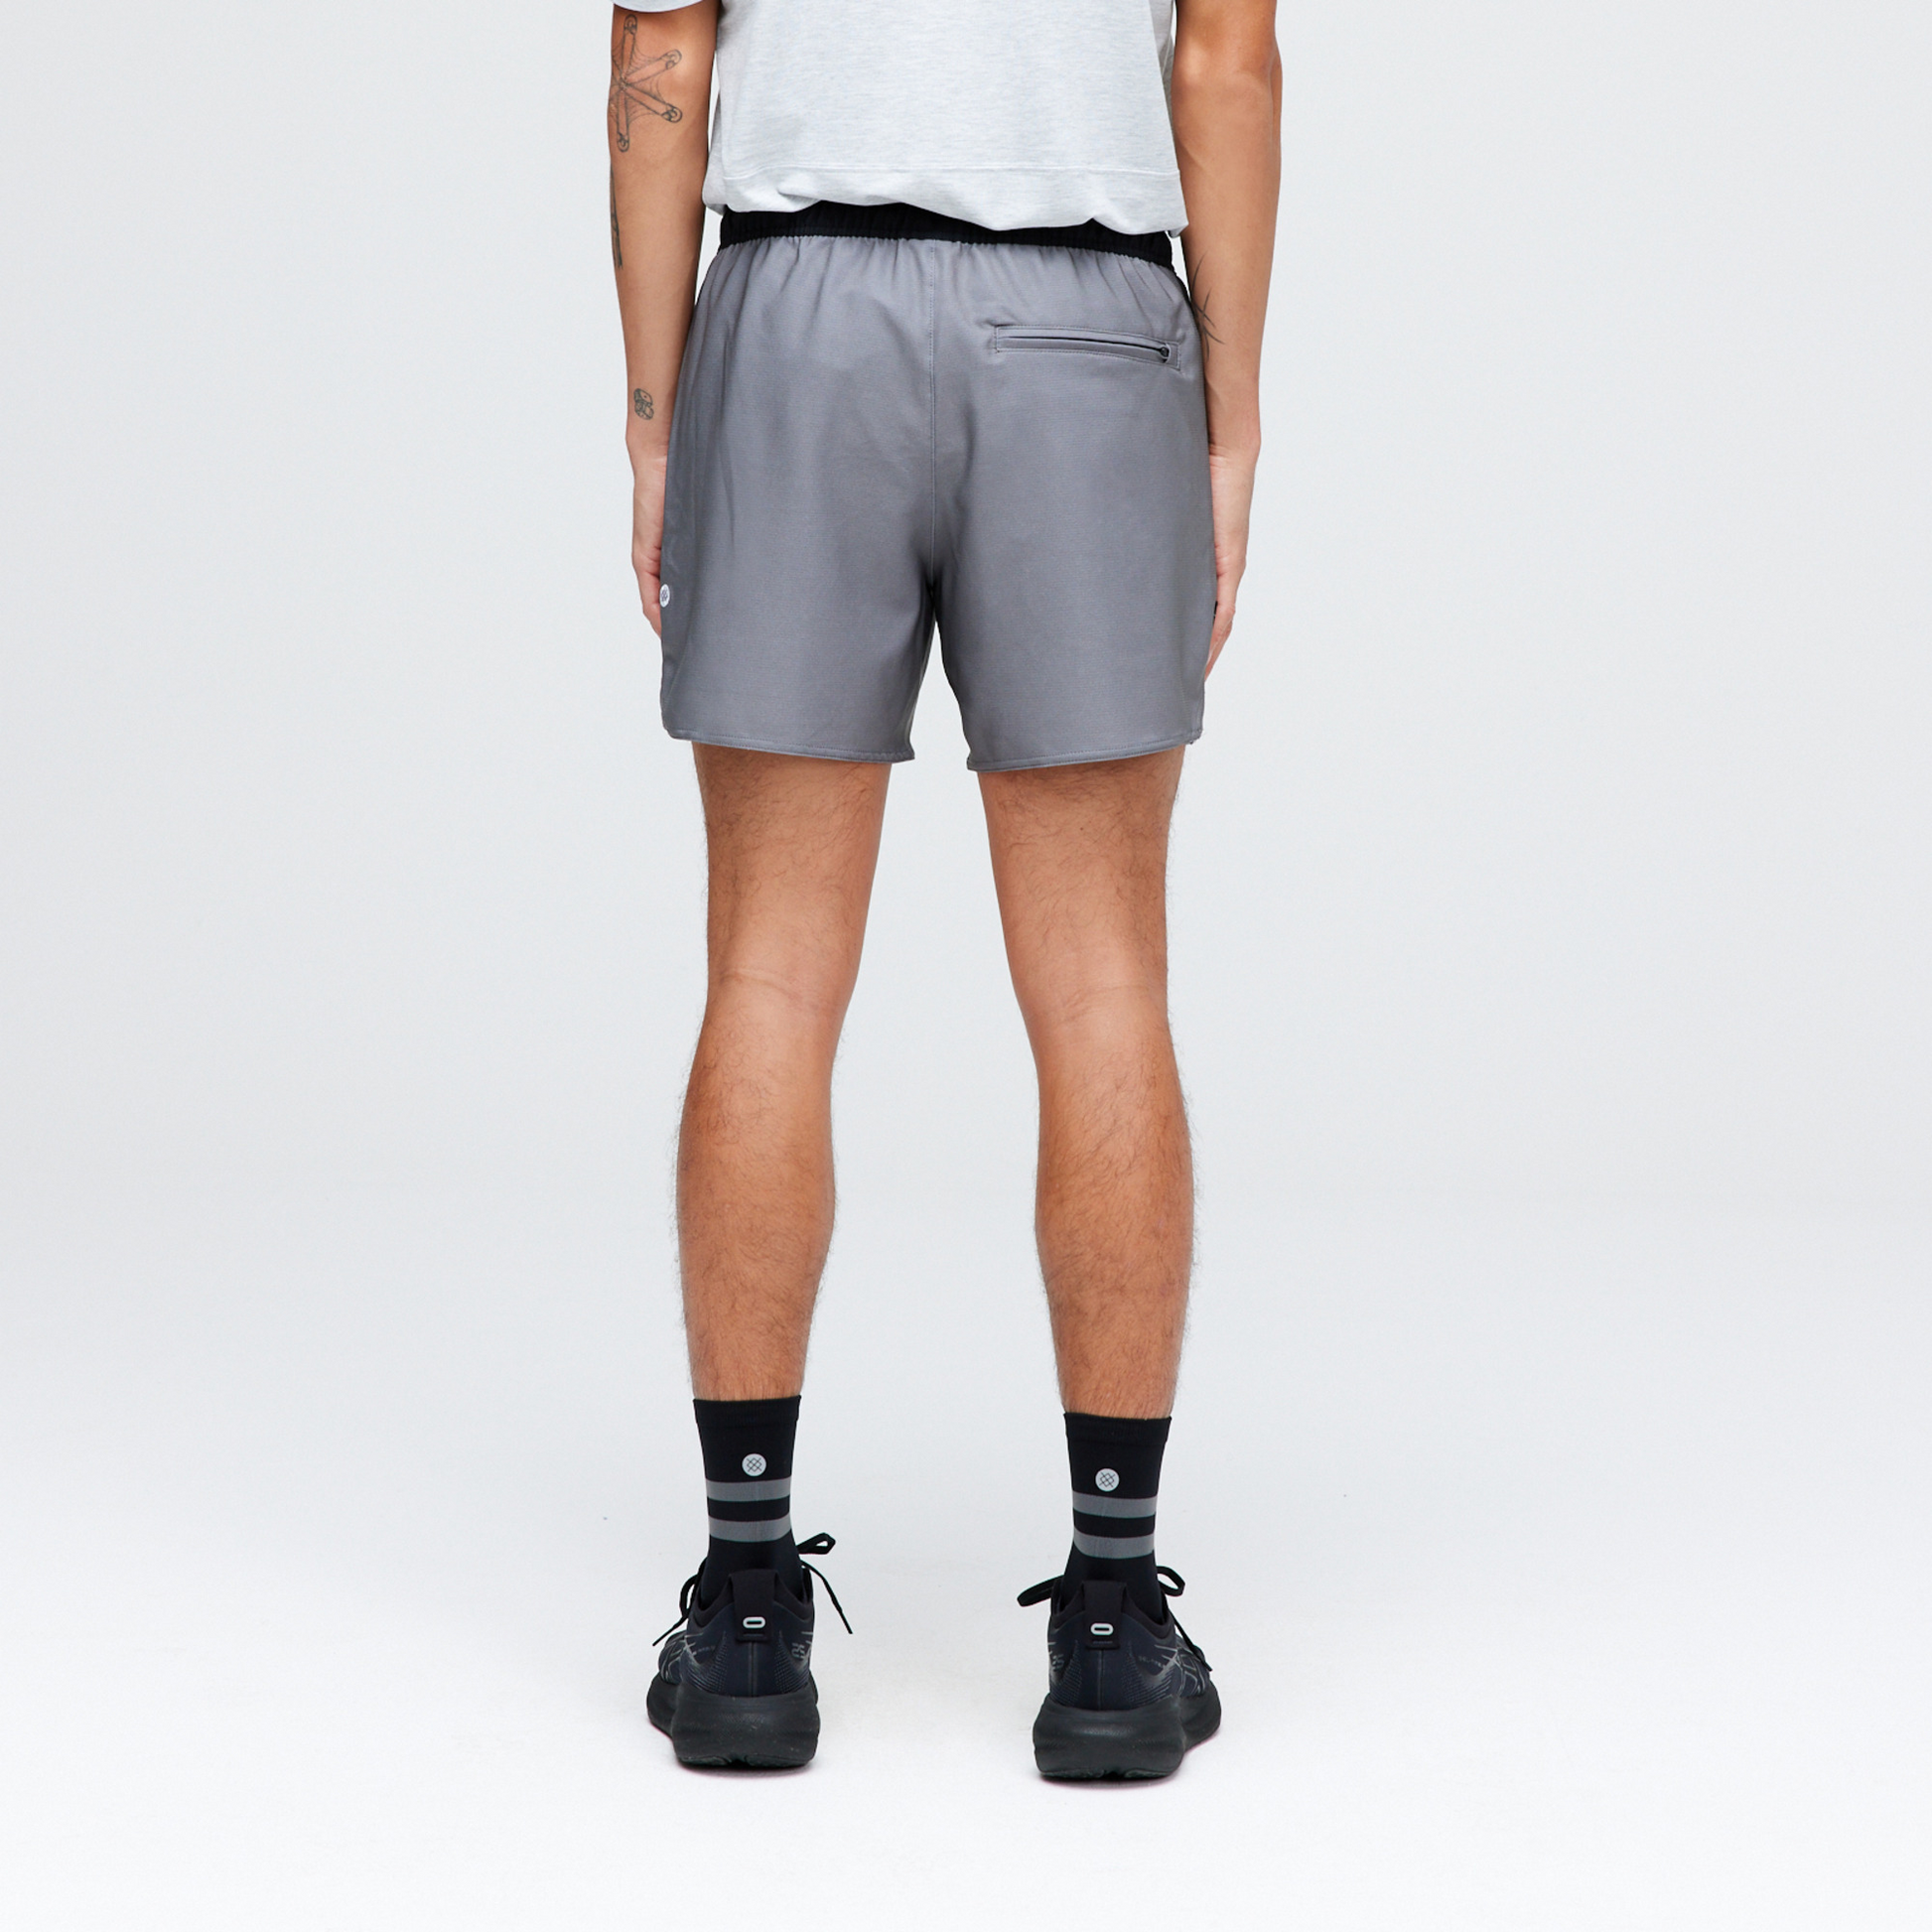 Stance Complex Athletic Short 5" Charcoal |model